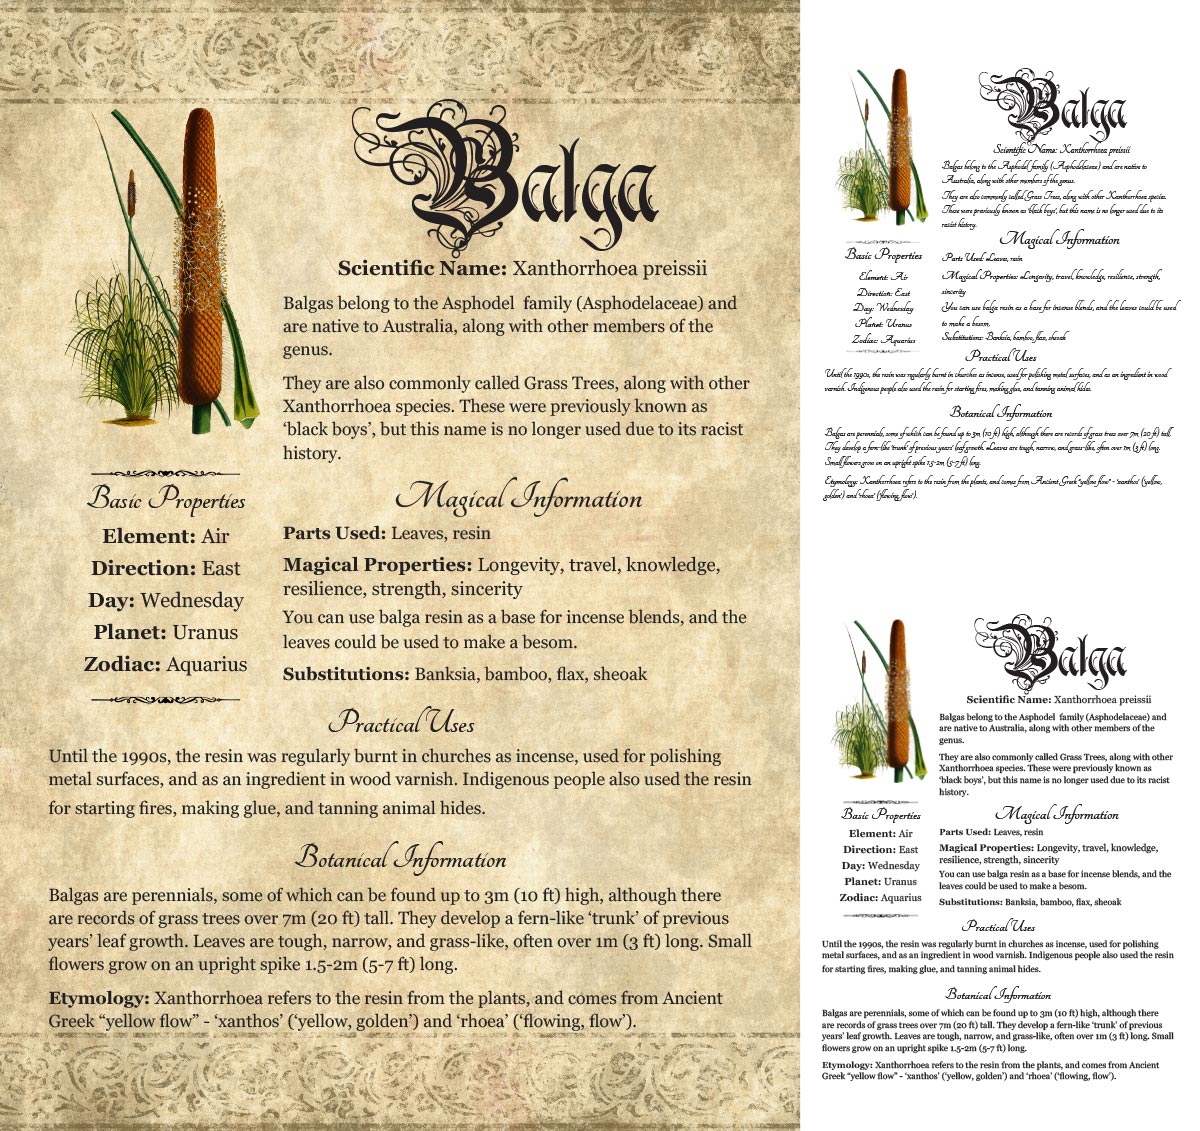 Collage of 3 versions of the Balga grimoire page: with a readable/serif vs script font + with/without background